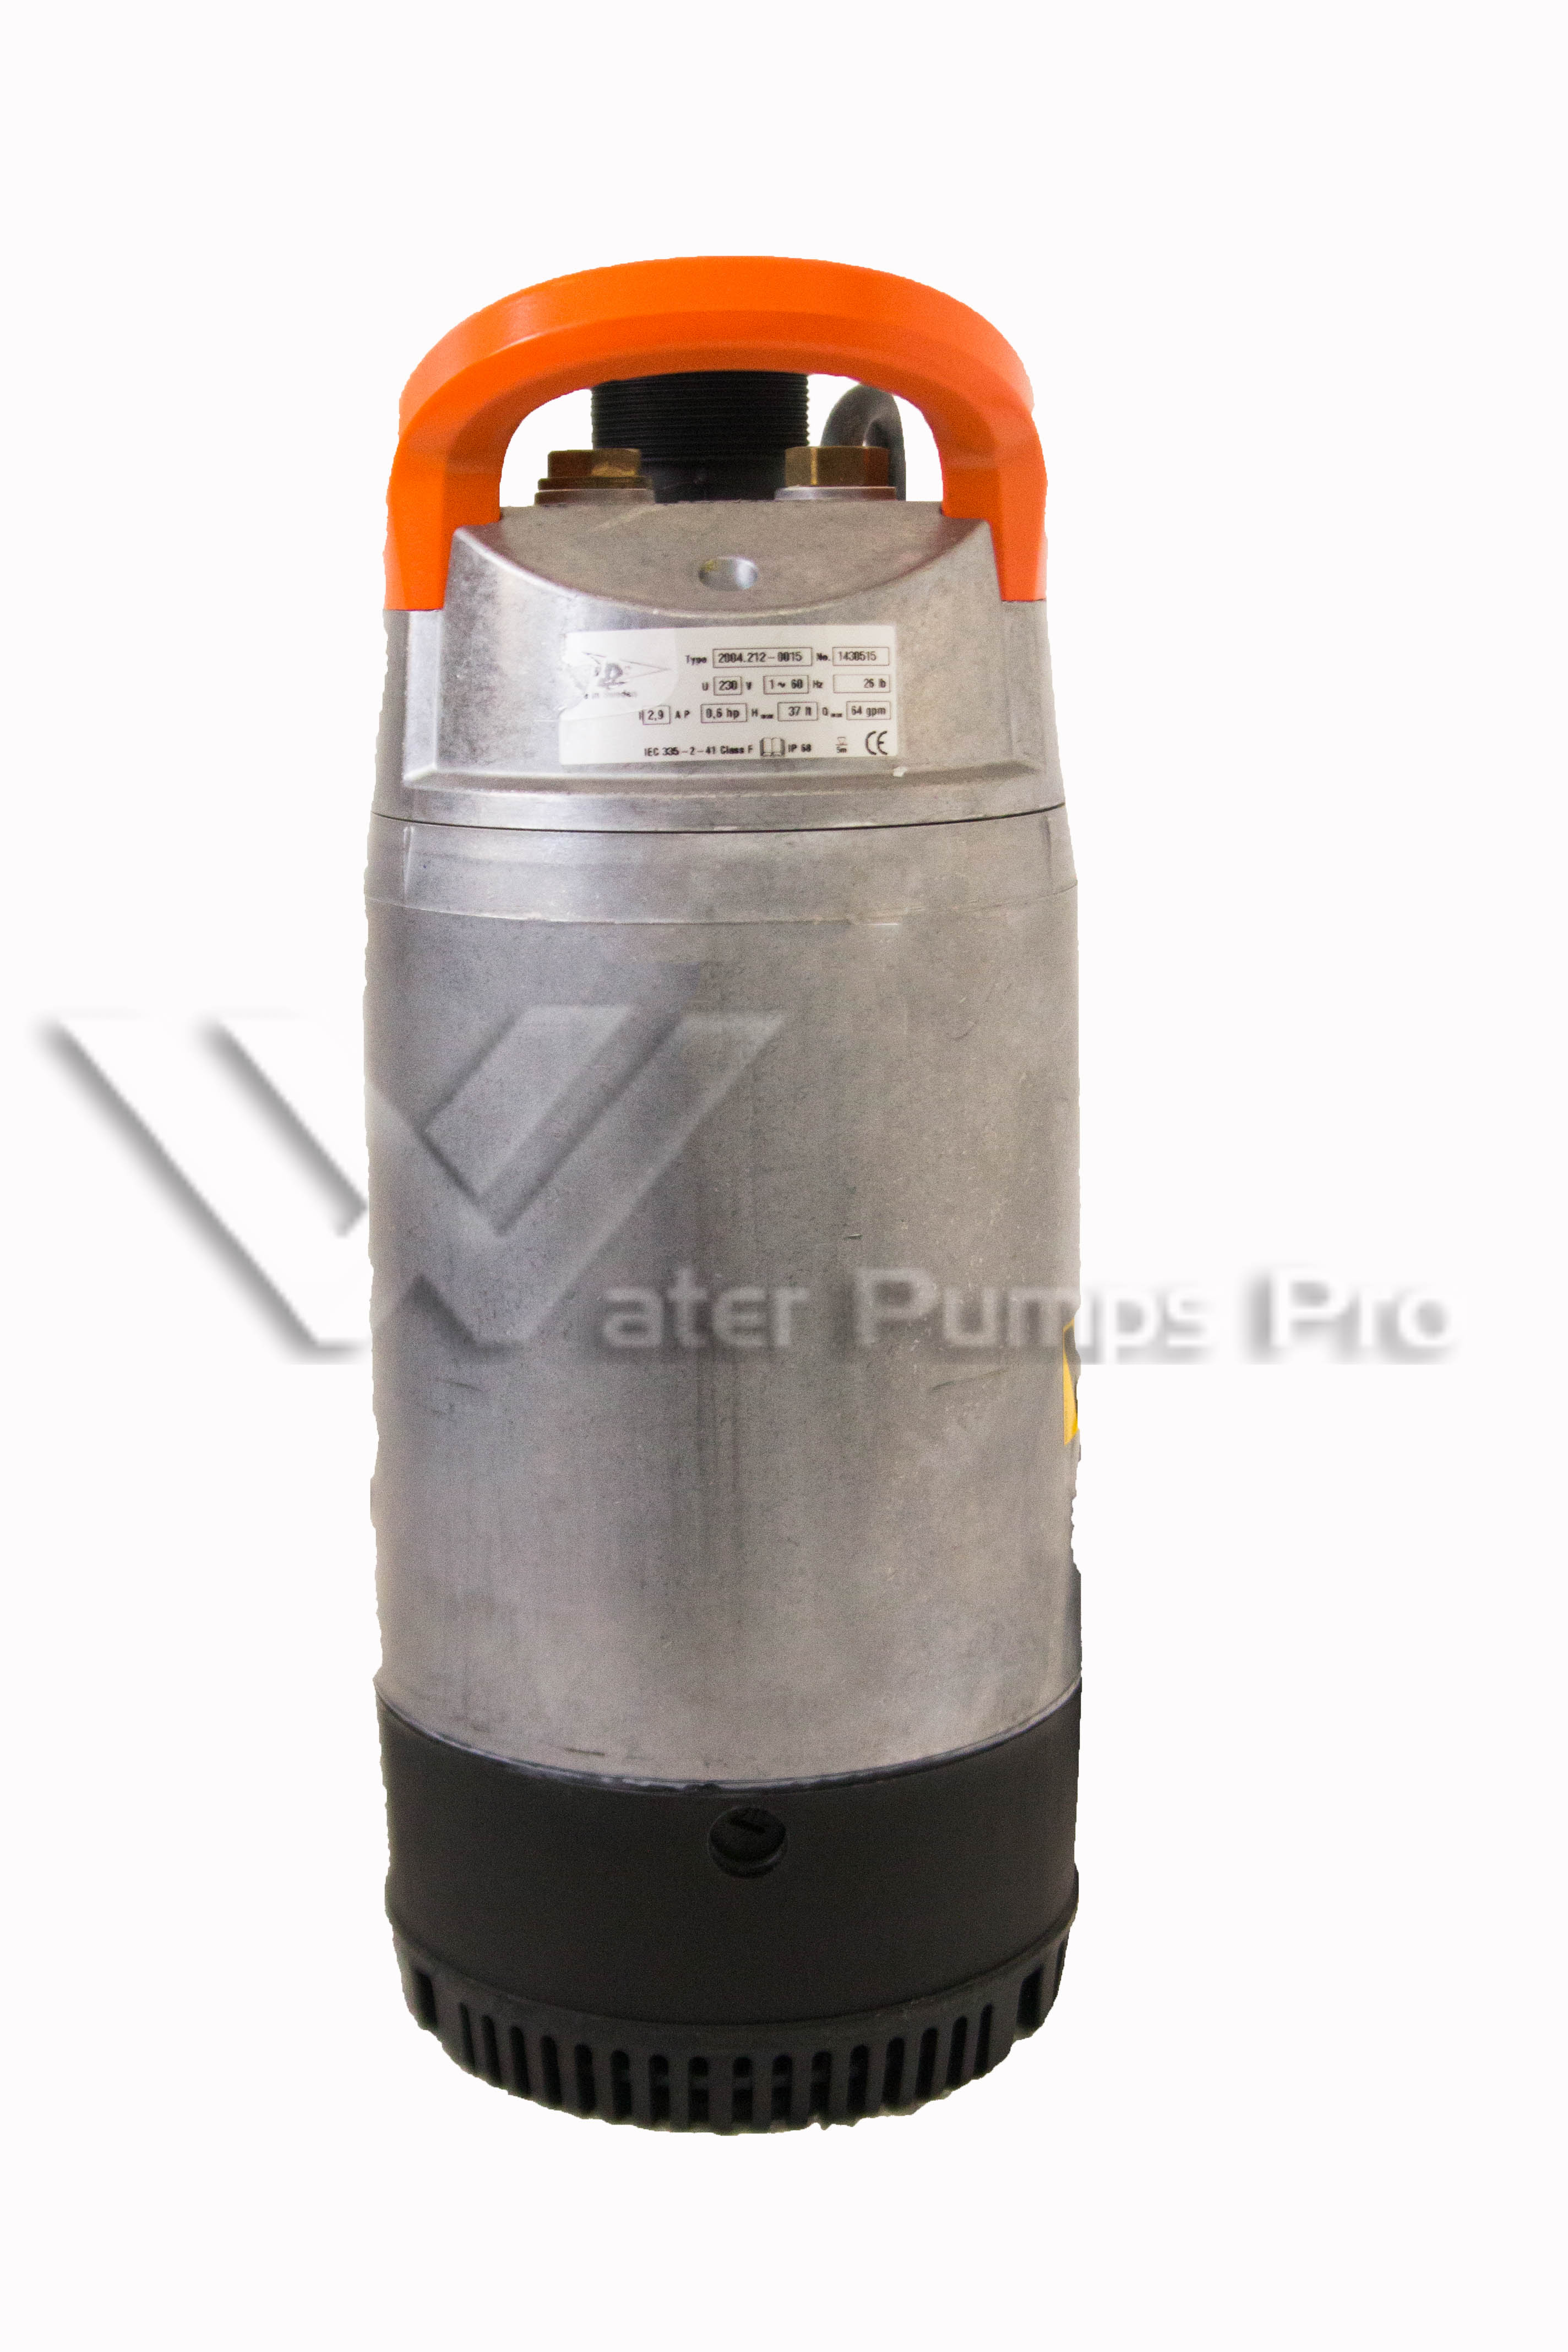 Goulds 2DW0512 Submersible Dewatering Pump 2DW 1/2HP 230V 1PH - Click Image to Close